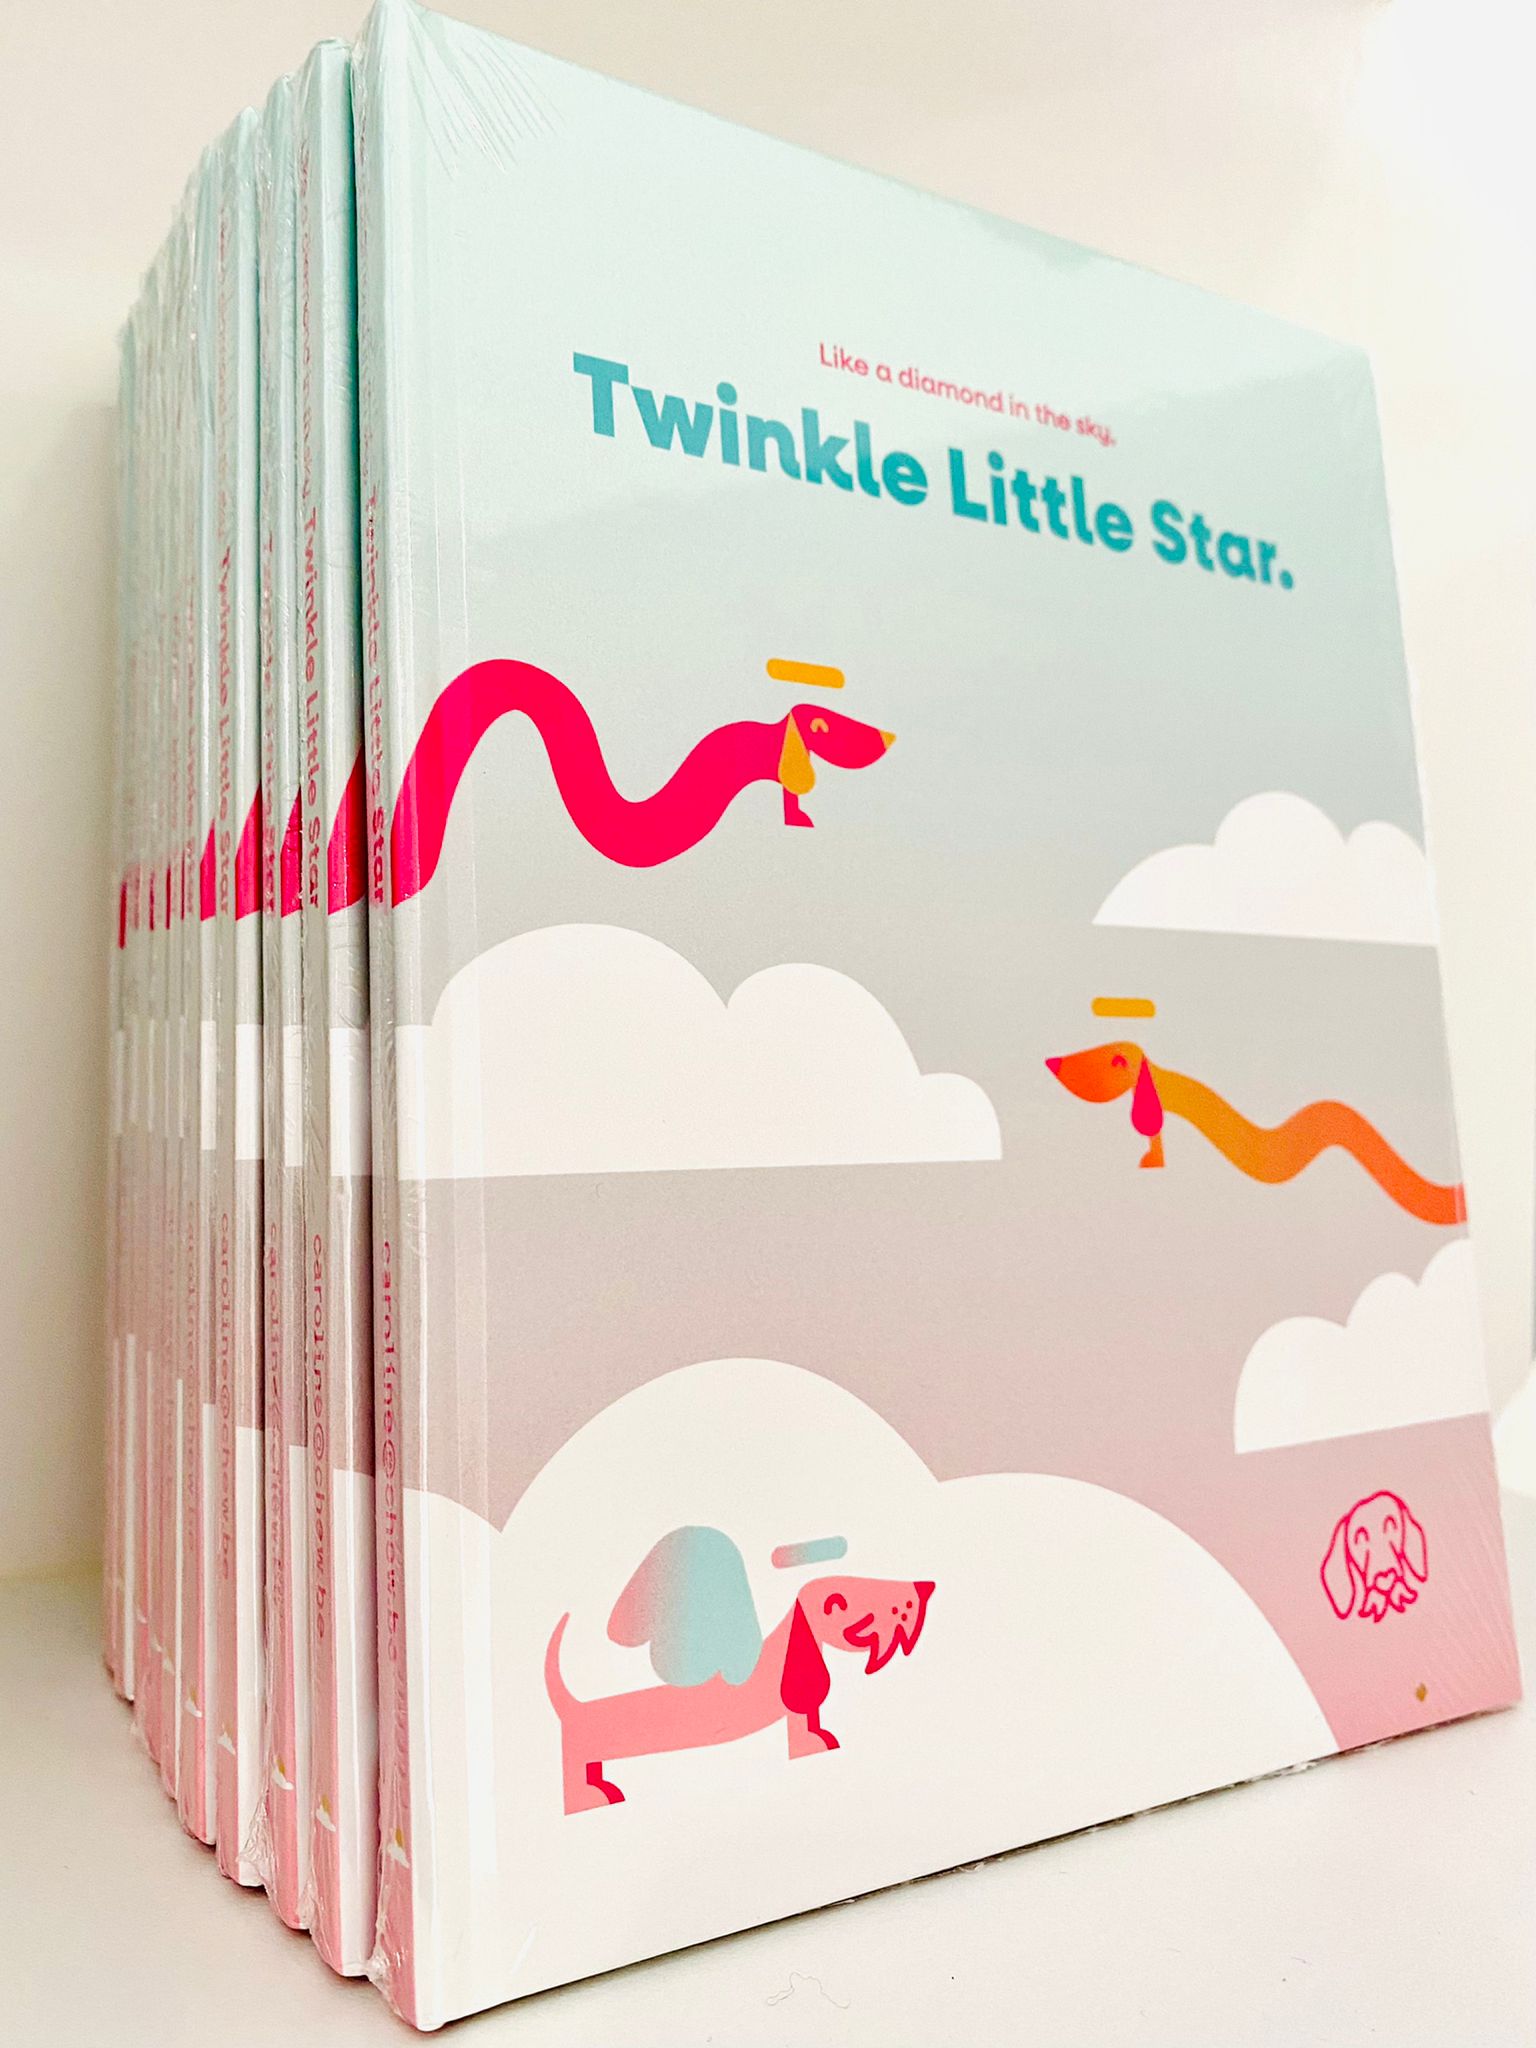 Dog Remembrance Book - Twinkle Little Star - A Diamond in the Sky